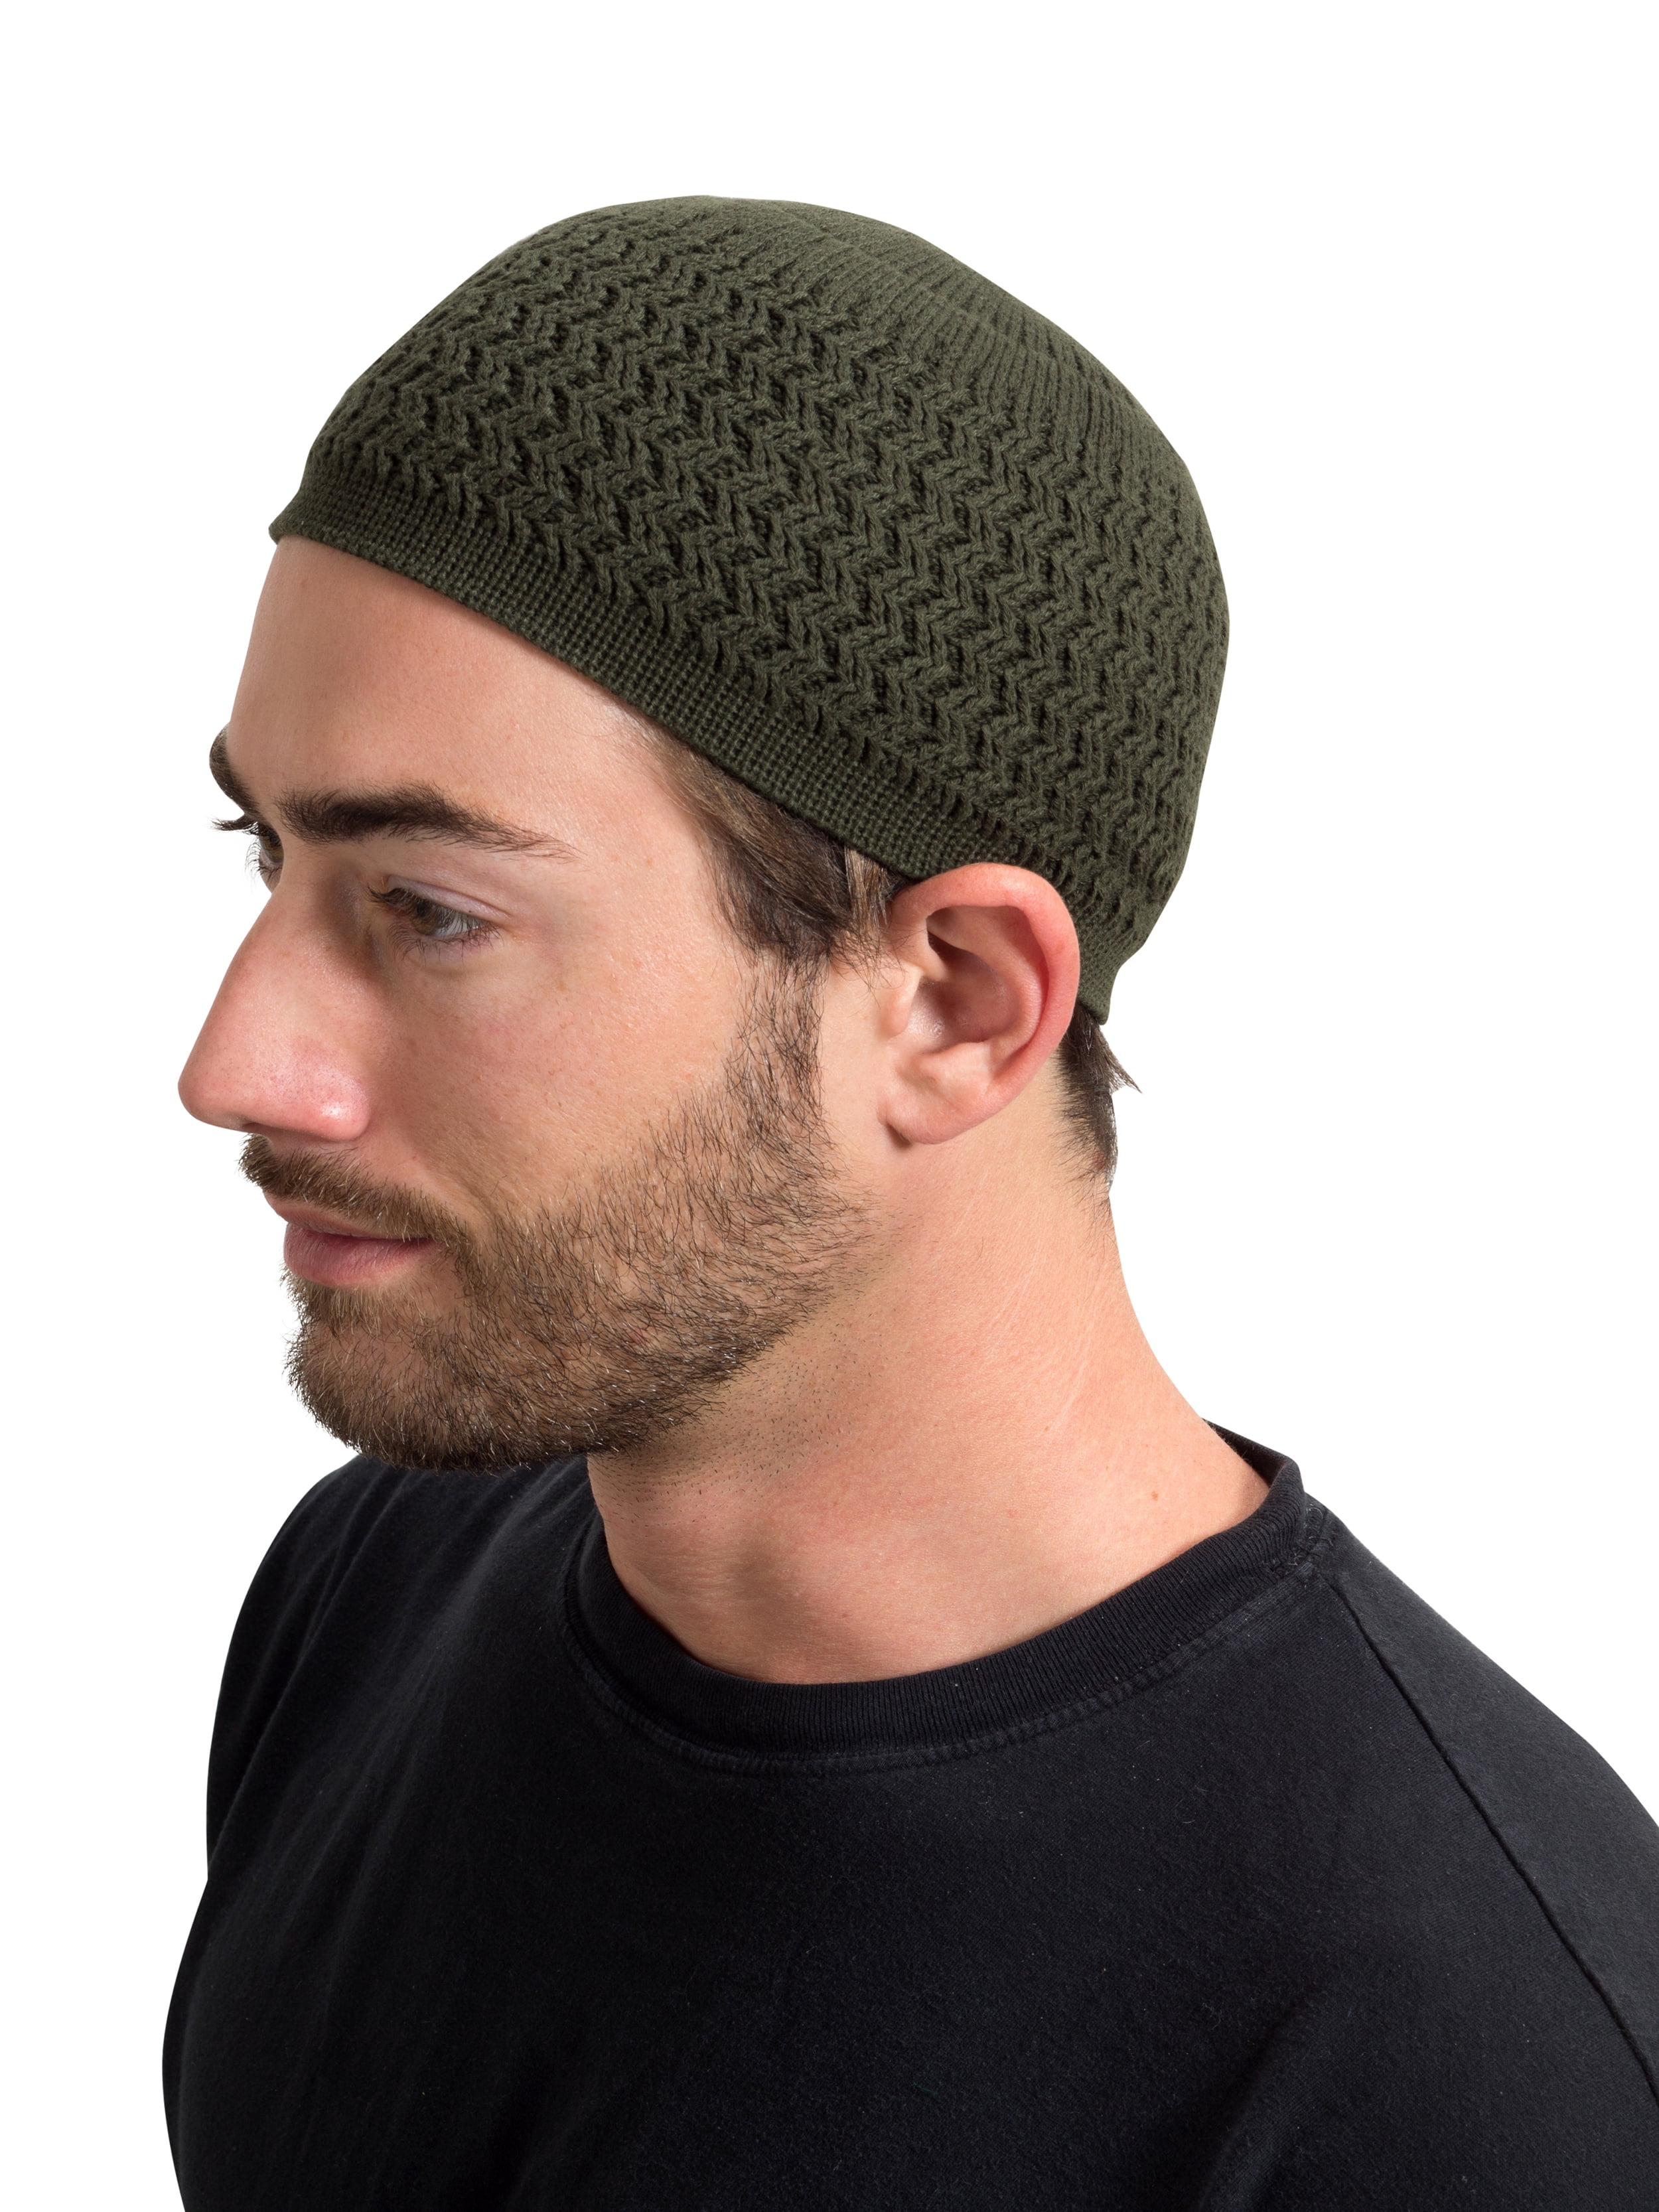 Candid Signature Apparel Zigzag Knit Kufi Hat Skull Cap One Size Fits All Men Women Chemo 